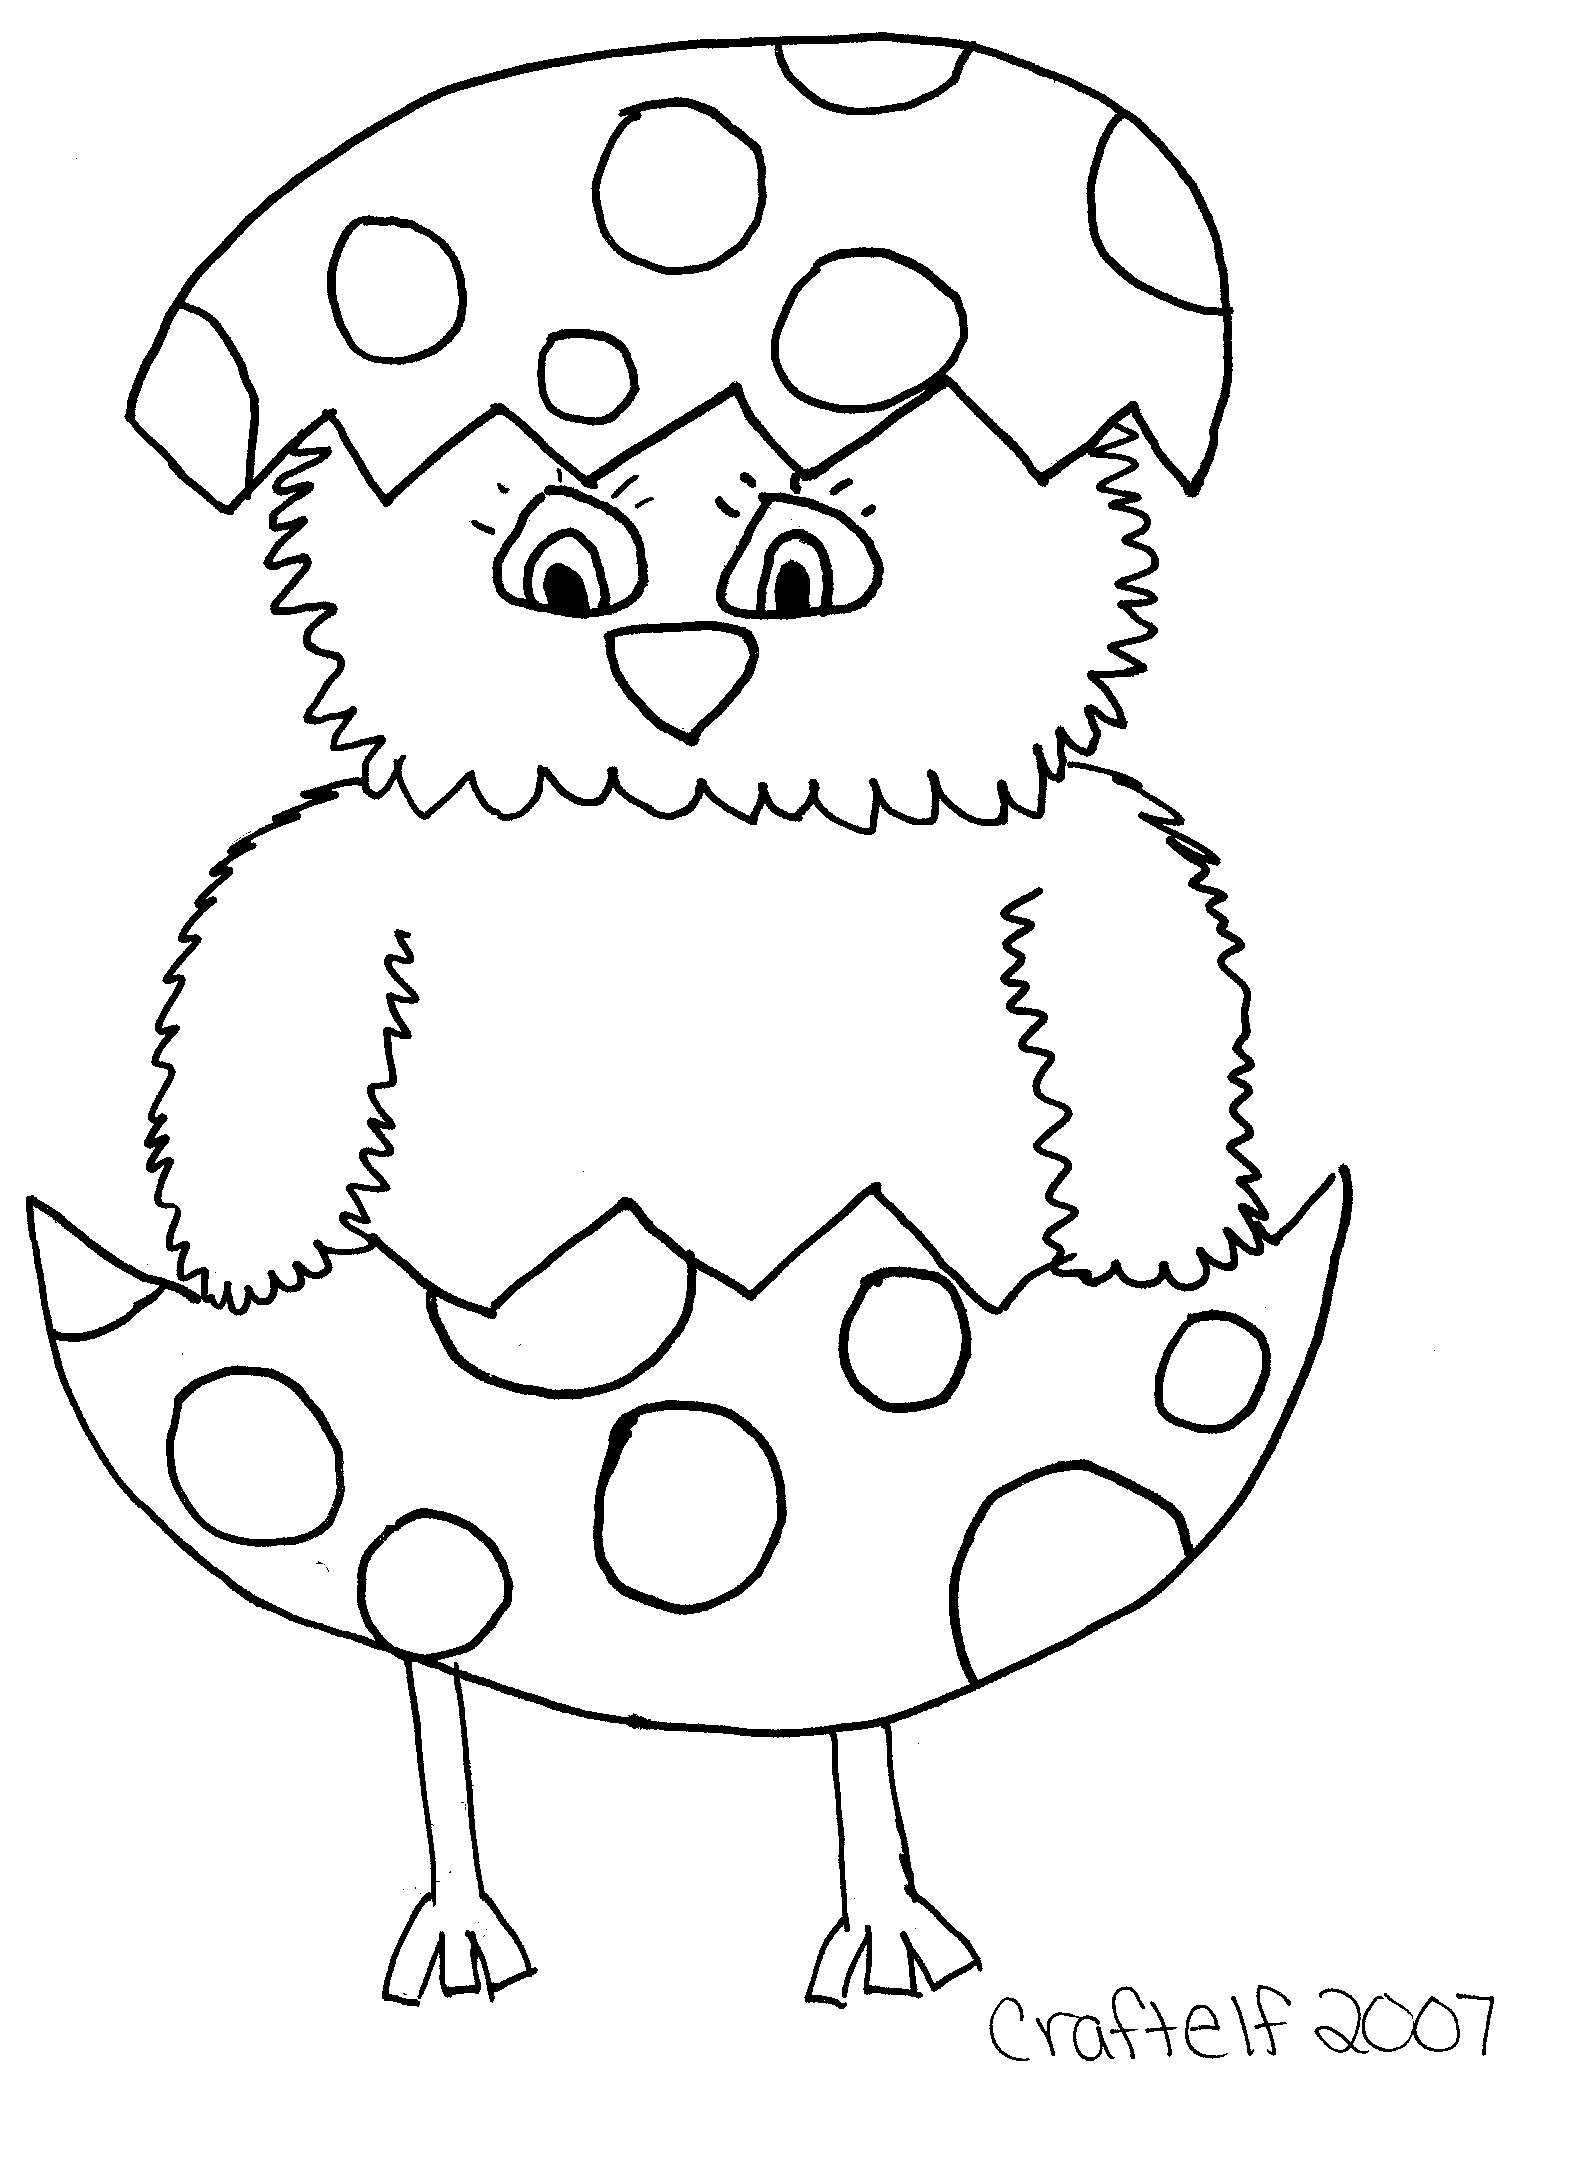 Coloring Pages : Religeous Easter Coloring Pages Printable Free For - Free Printable Easter Coloring Pages